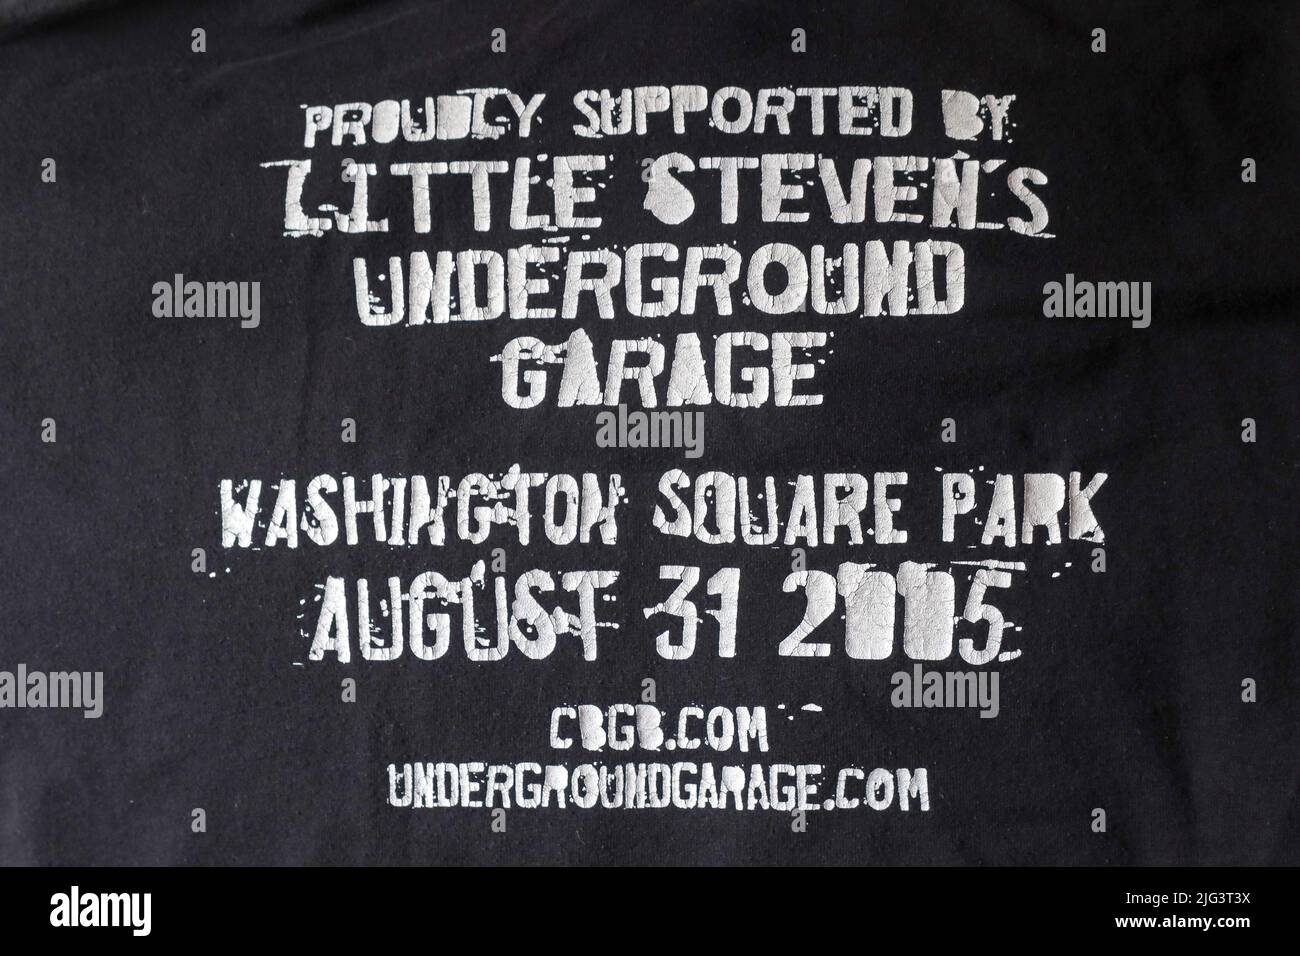 CBGB Forever Festival, Proudly supported by Little Stevens Underground Garage,Washington Square Park,August 31 2005,CGGB.Com Stock Photo